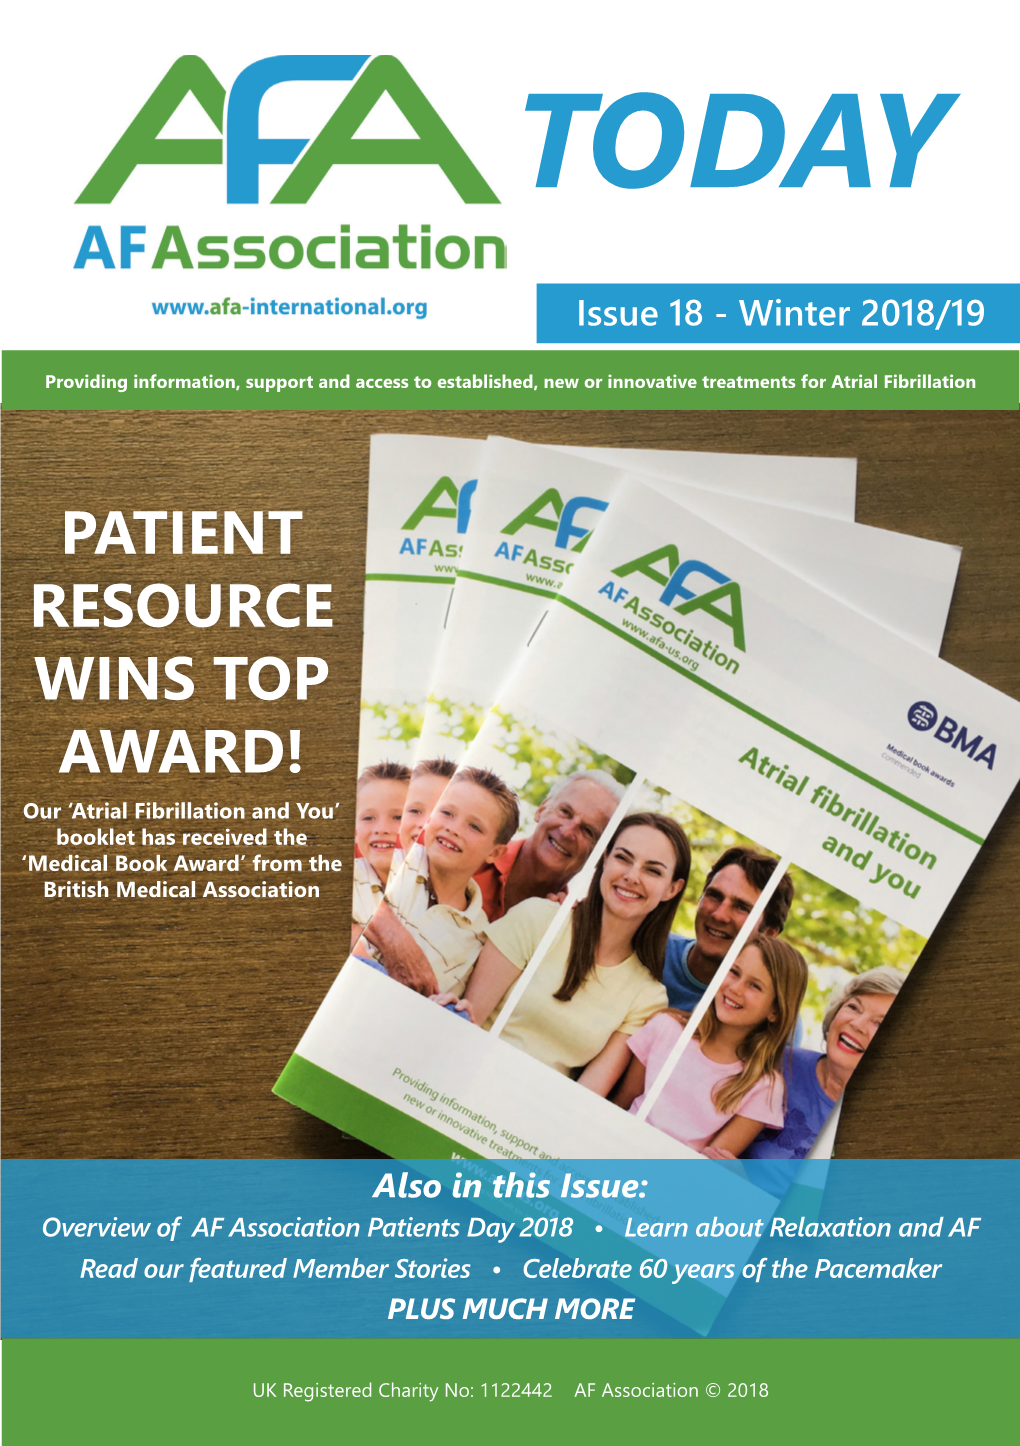 PATIENT RESOURCE WINS TOP AWARD! Our ‘Atrial Fibrillation and You’ Booklet Has Received the ‘Medical Book Award’ from the British Medical Association